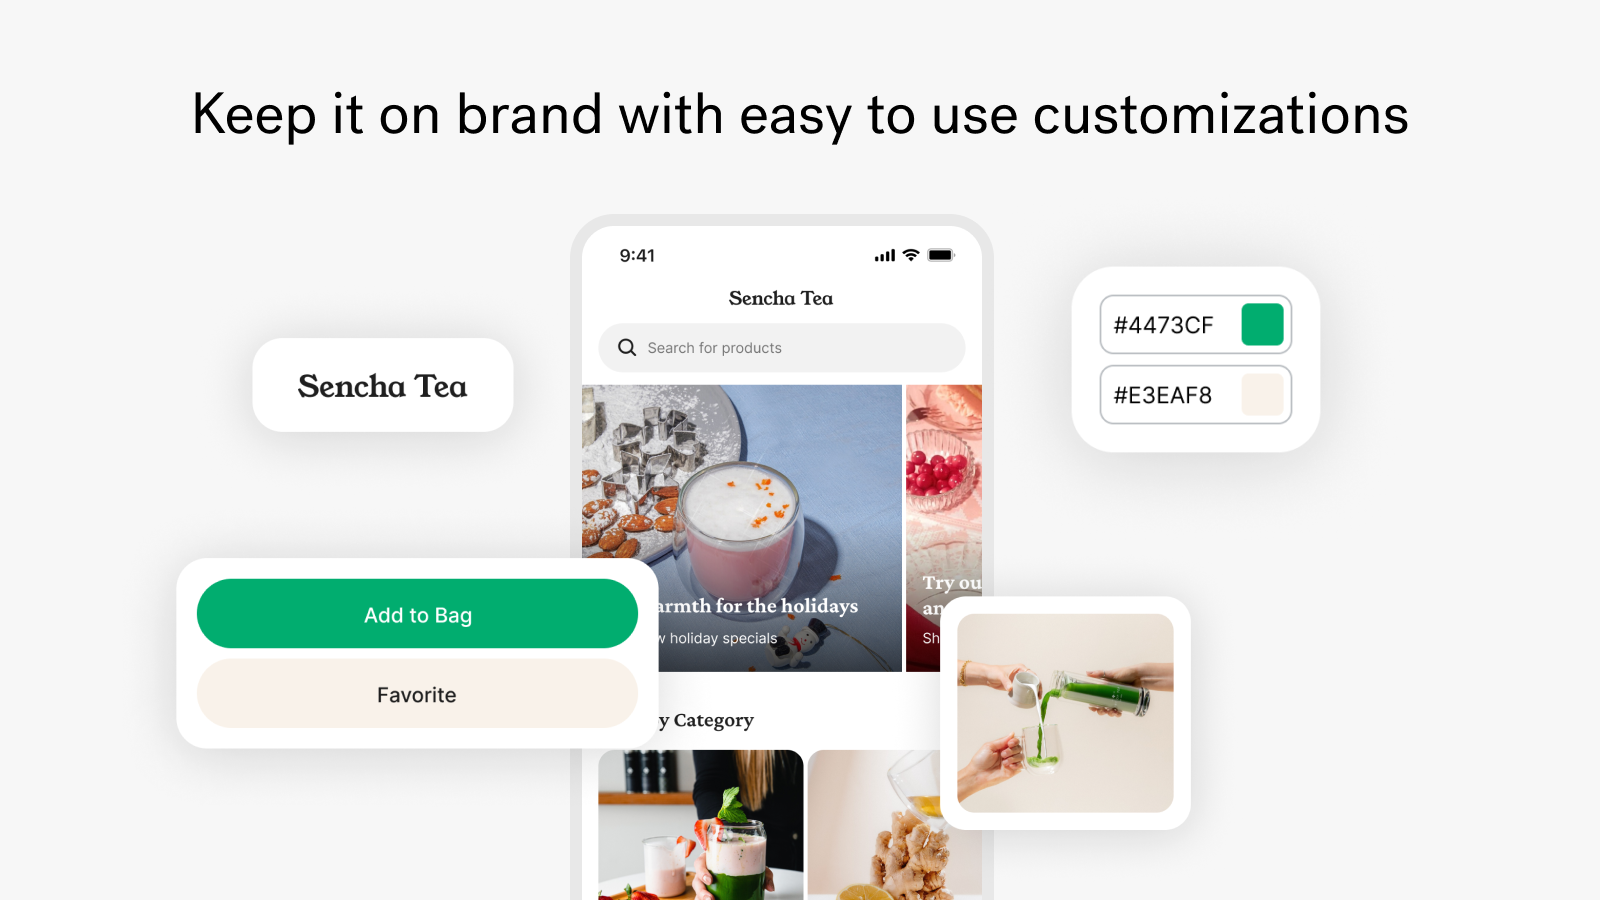 Keep it on brand with easy to use customizations